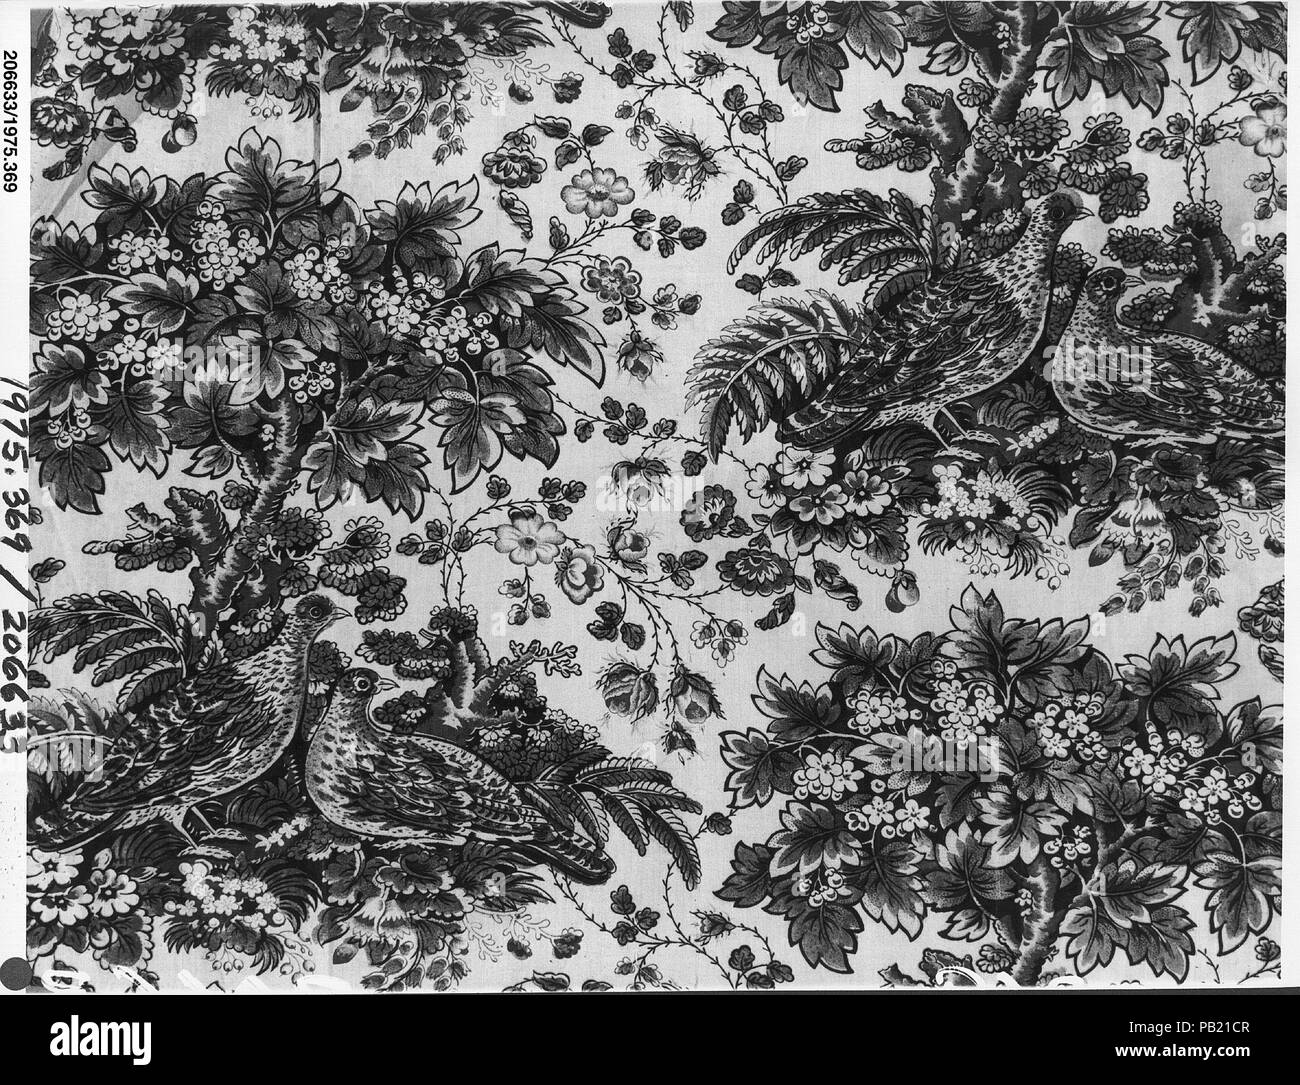 Section of bedskirt printed with game birds. Culture: British or American. Dimensions: L. 24 1/2 x W. 26 inches  62.2 x 66.0 cm. Date: 1830s. Museum: Metropolitan Museum of Art, New York, USA. Stock Photo